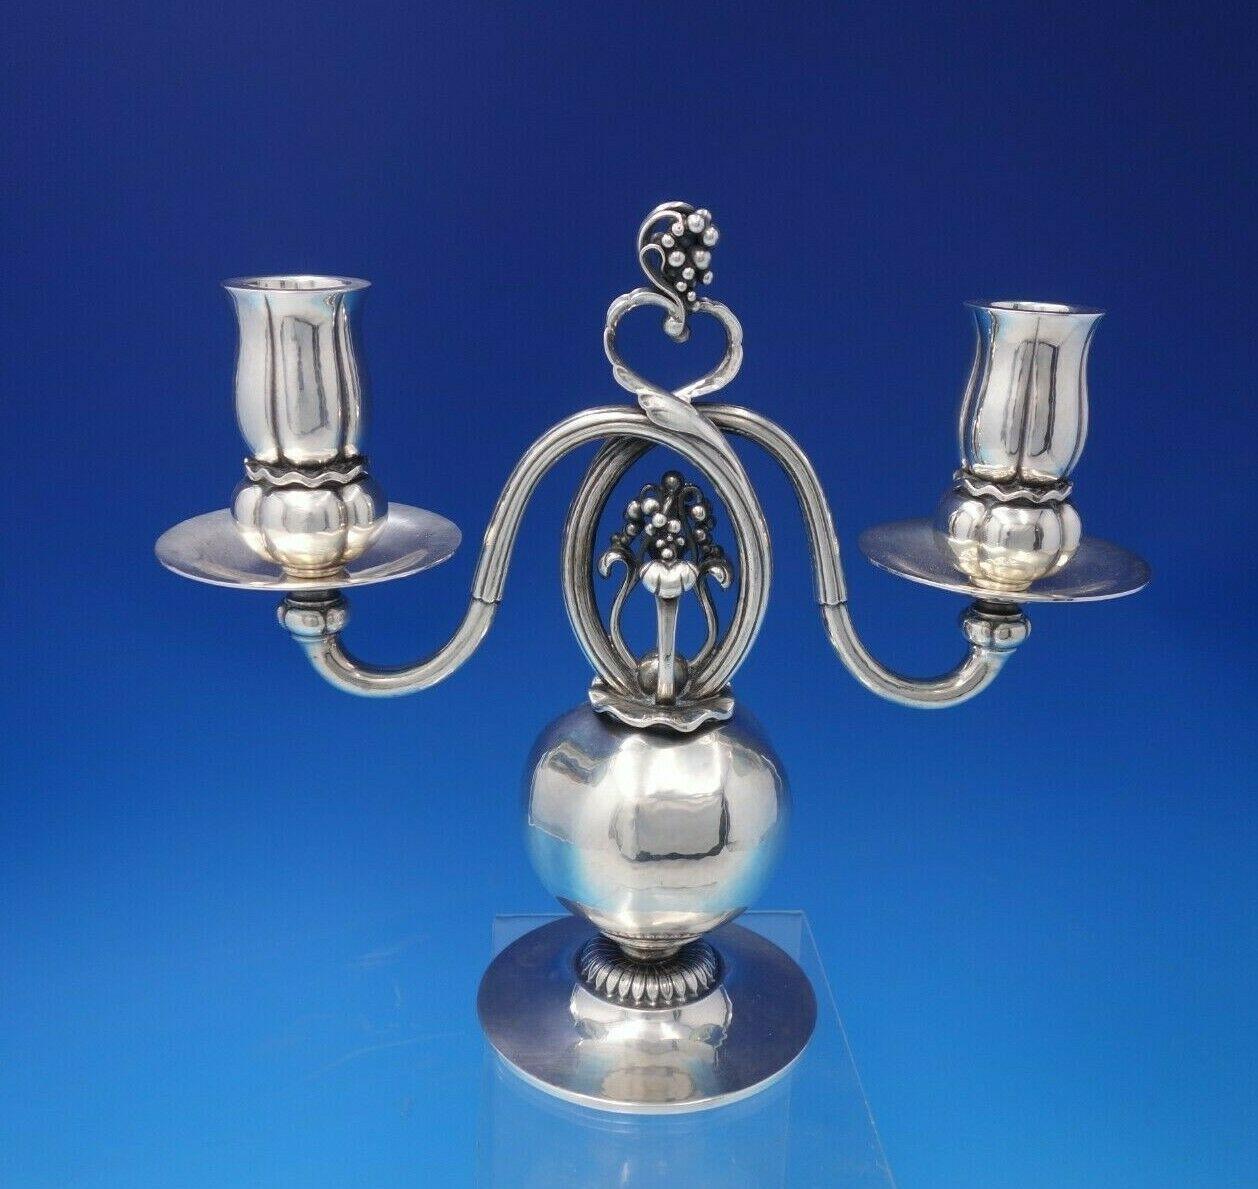 Georg Jensen sterling silver pair of Candelabra, No. 244

Pomegranate by Georg Jensen

Magnificent rare hand hammered Pomegranate by Georg Jensen sterling silver two-light candelabra pair with figural grape design, marked #324. The pieces